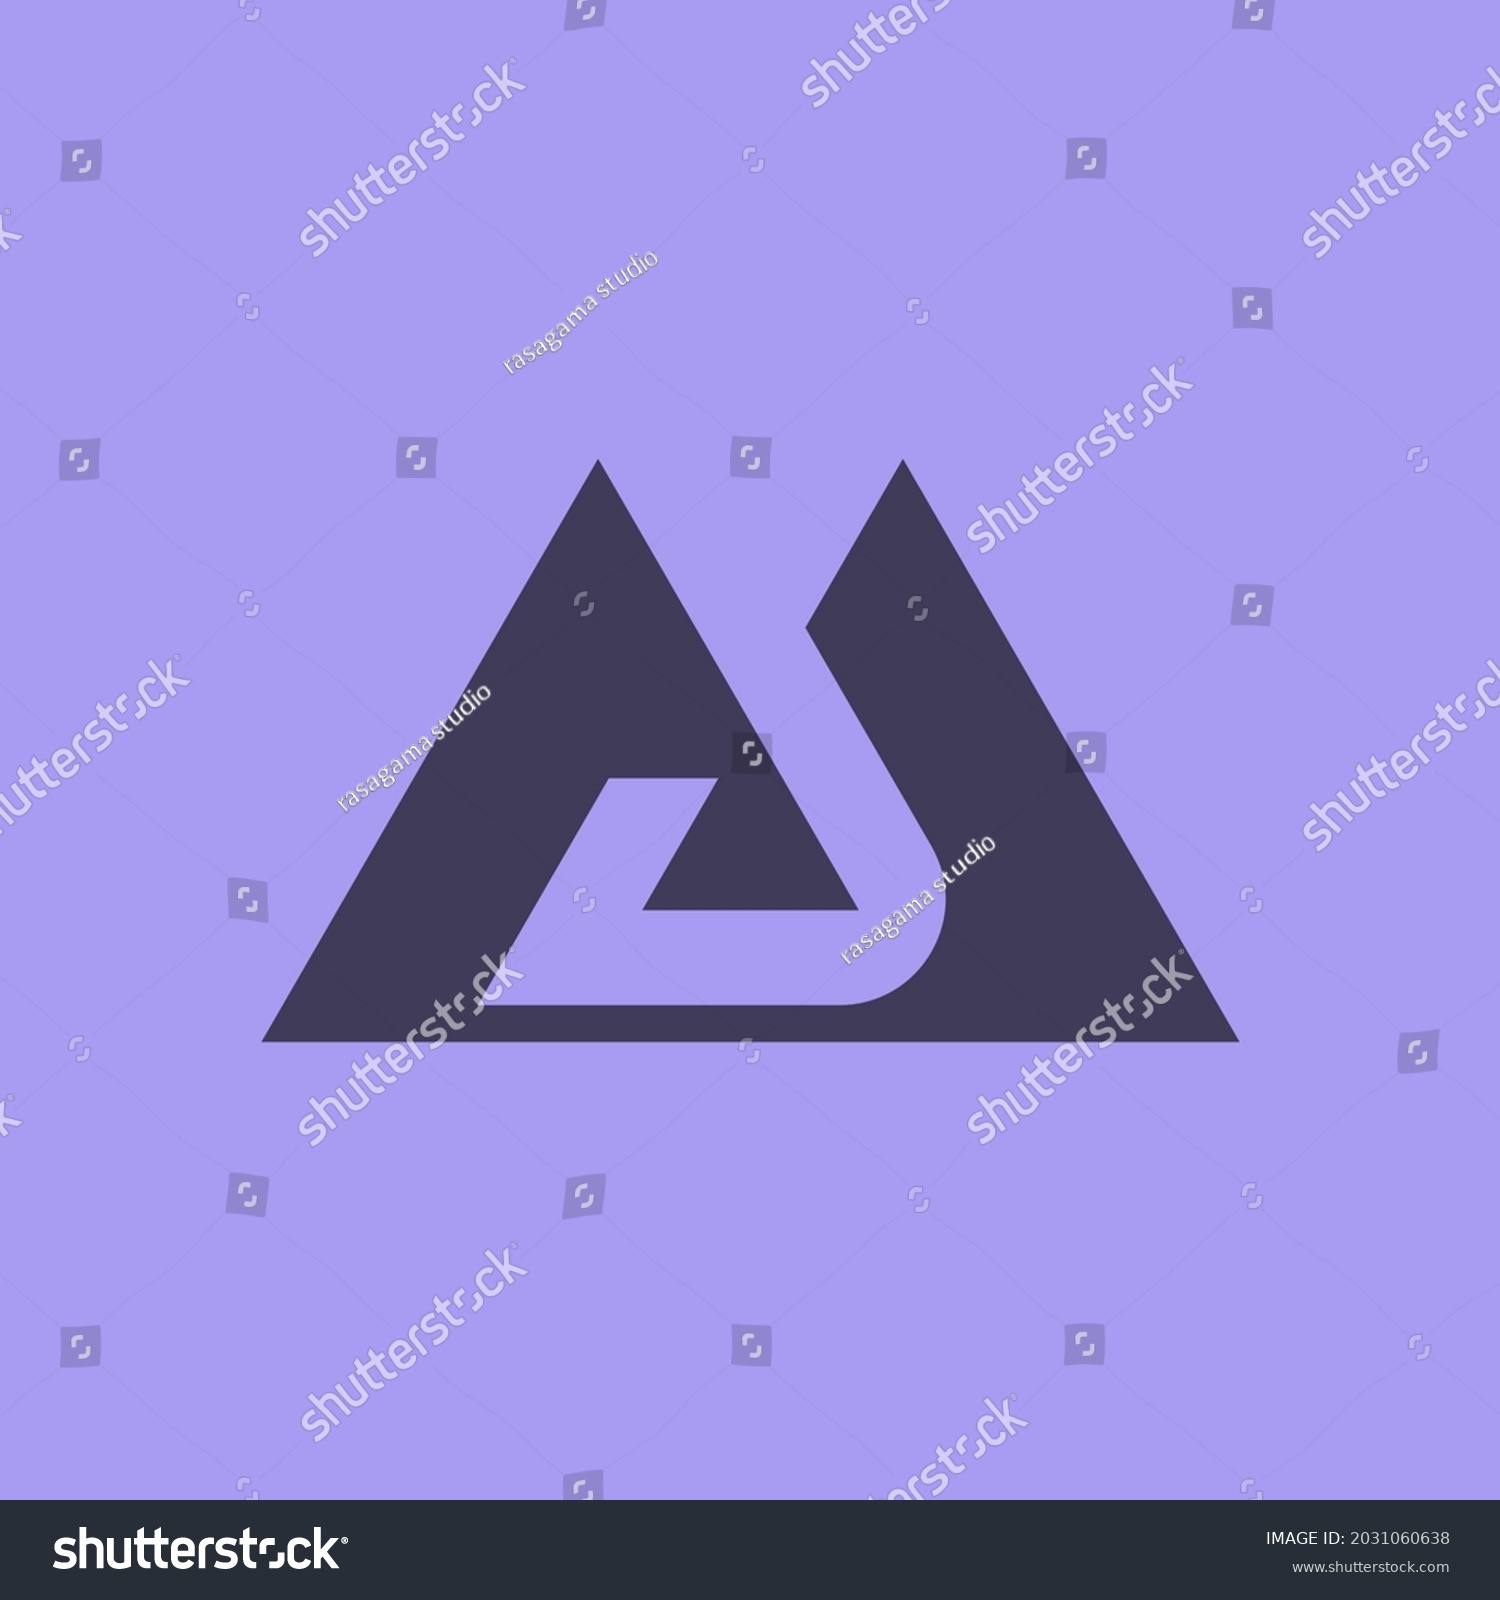 SVG of MD lettermark logo. alphabet logo that combines 2 letters into new mark or symbol that is unique and original. consists of letters M and D.  svg